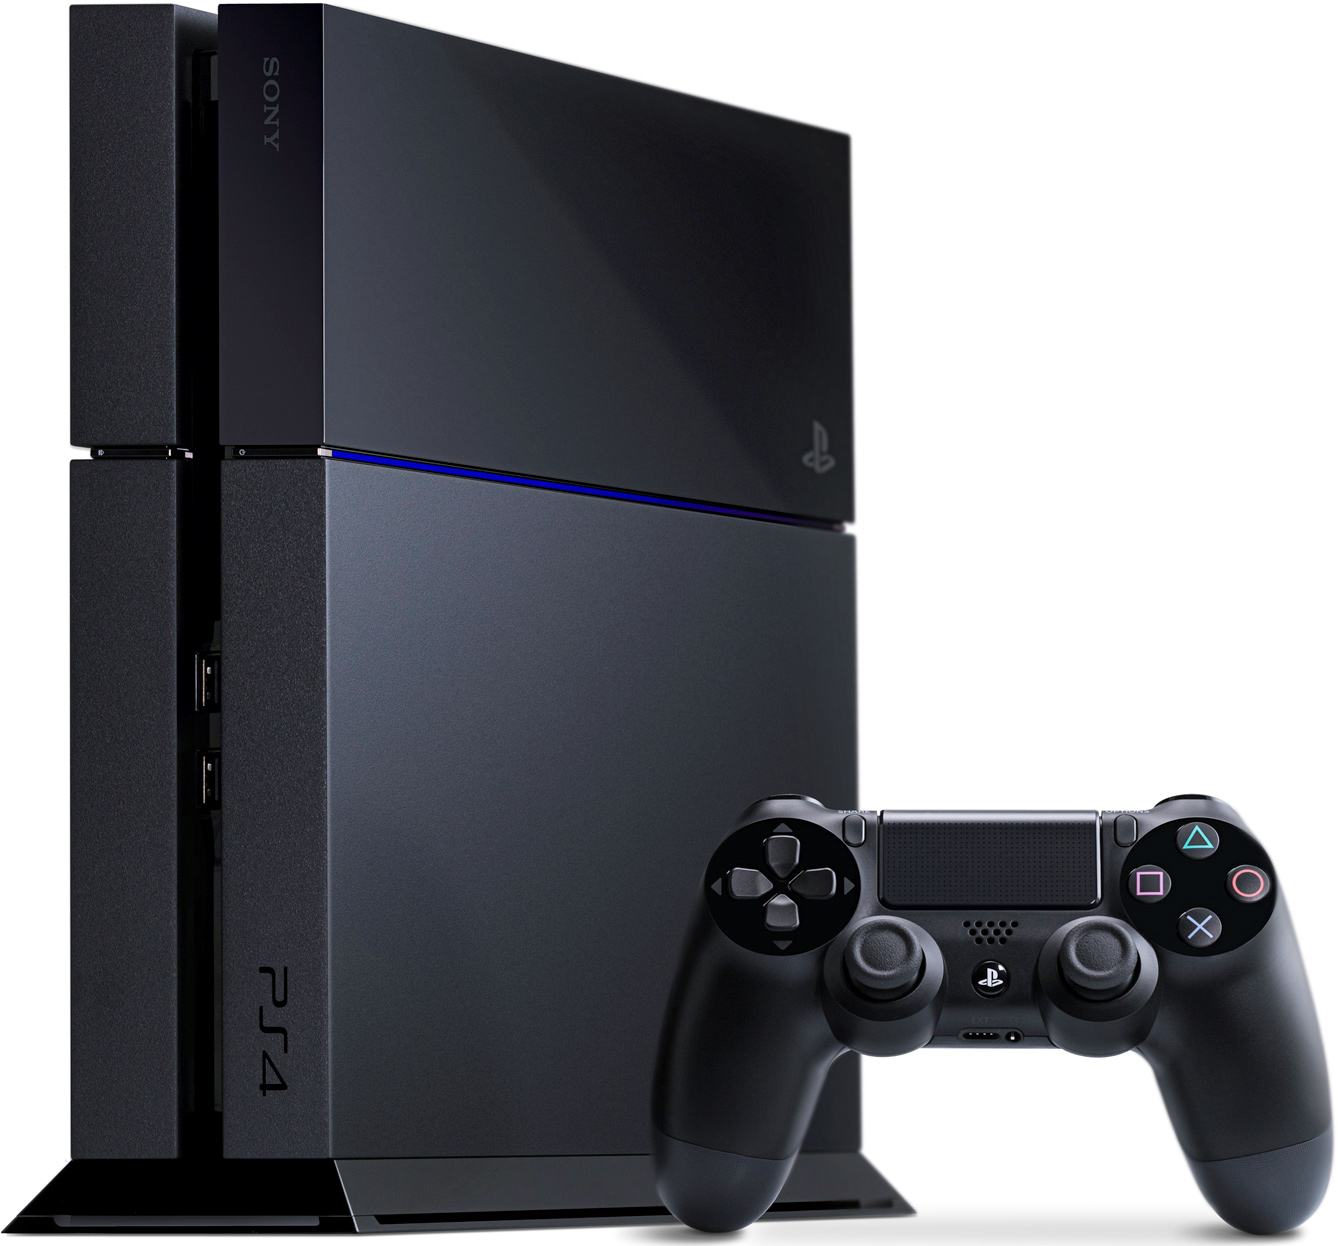 Sony More than 10 Million PlayStation 4 game consoles